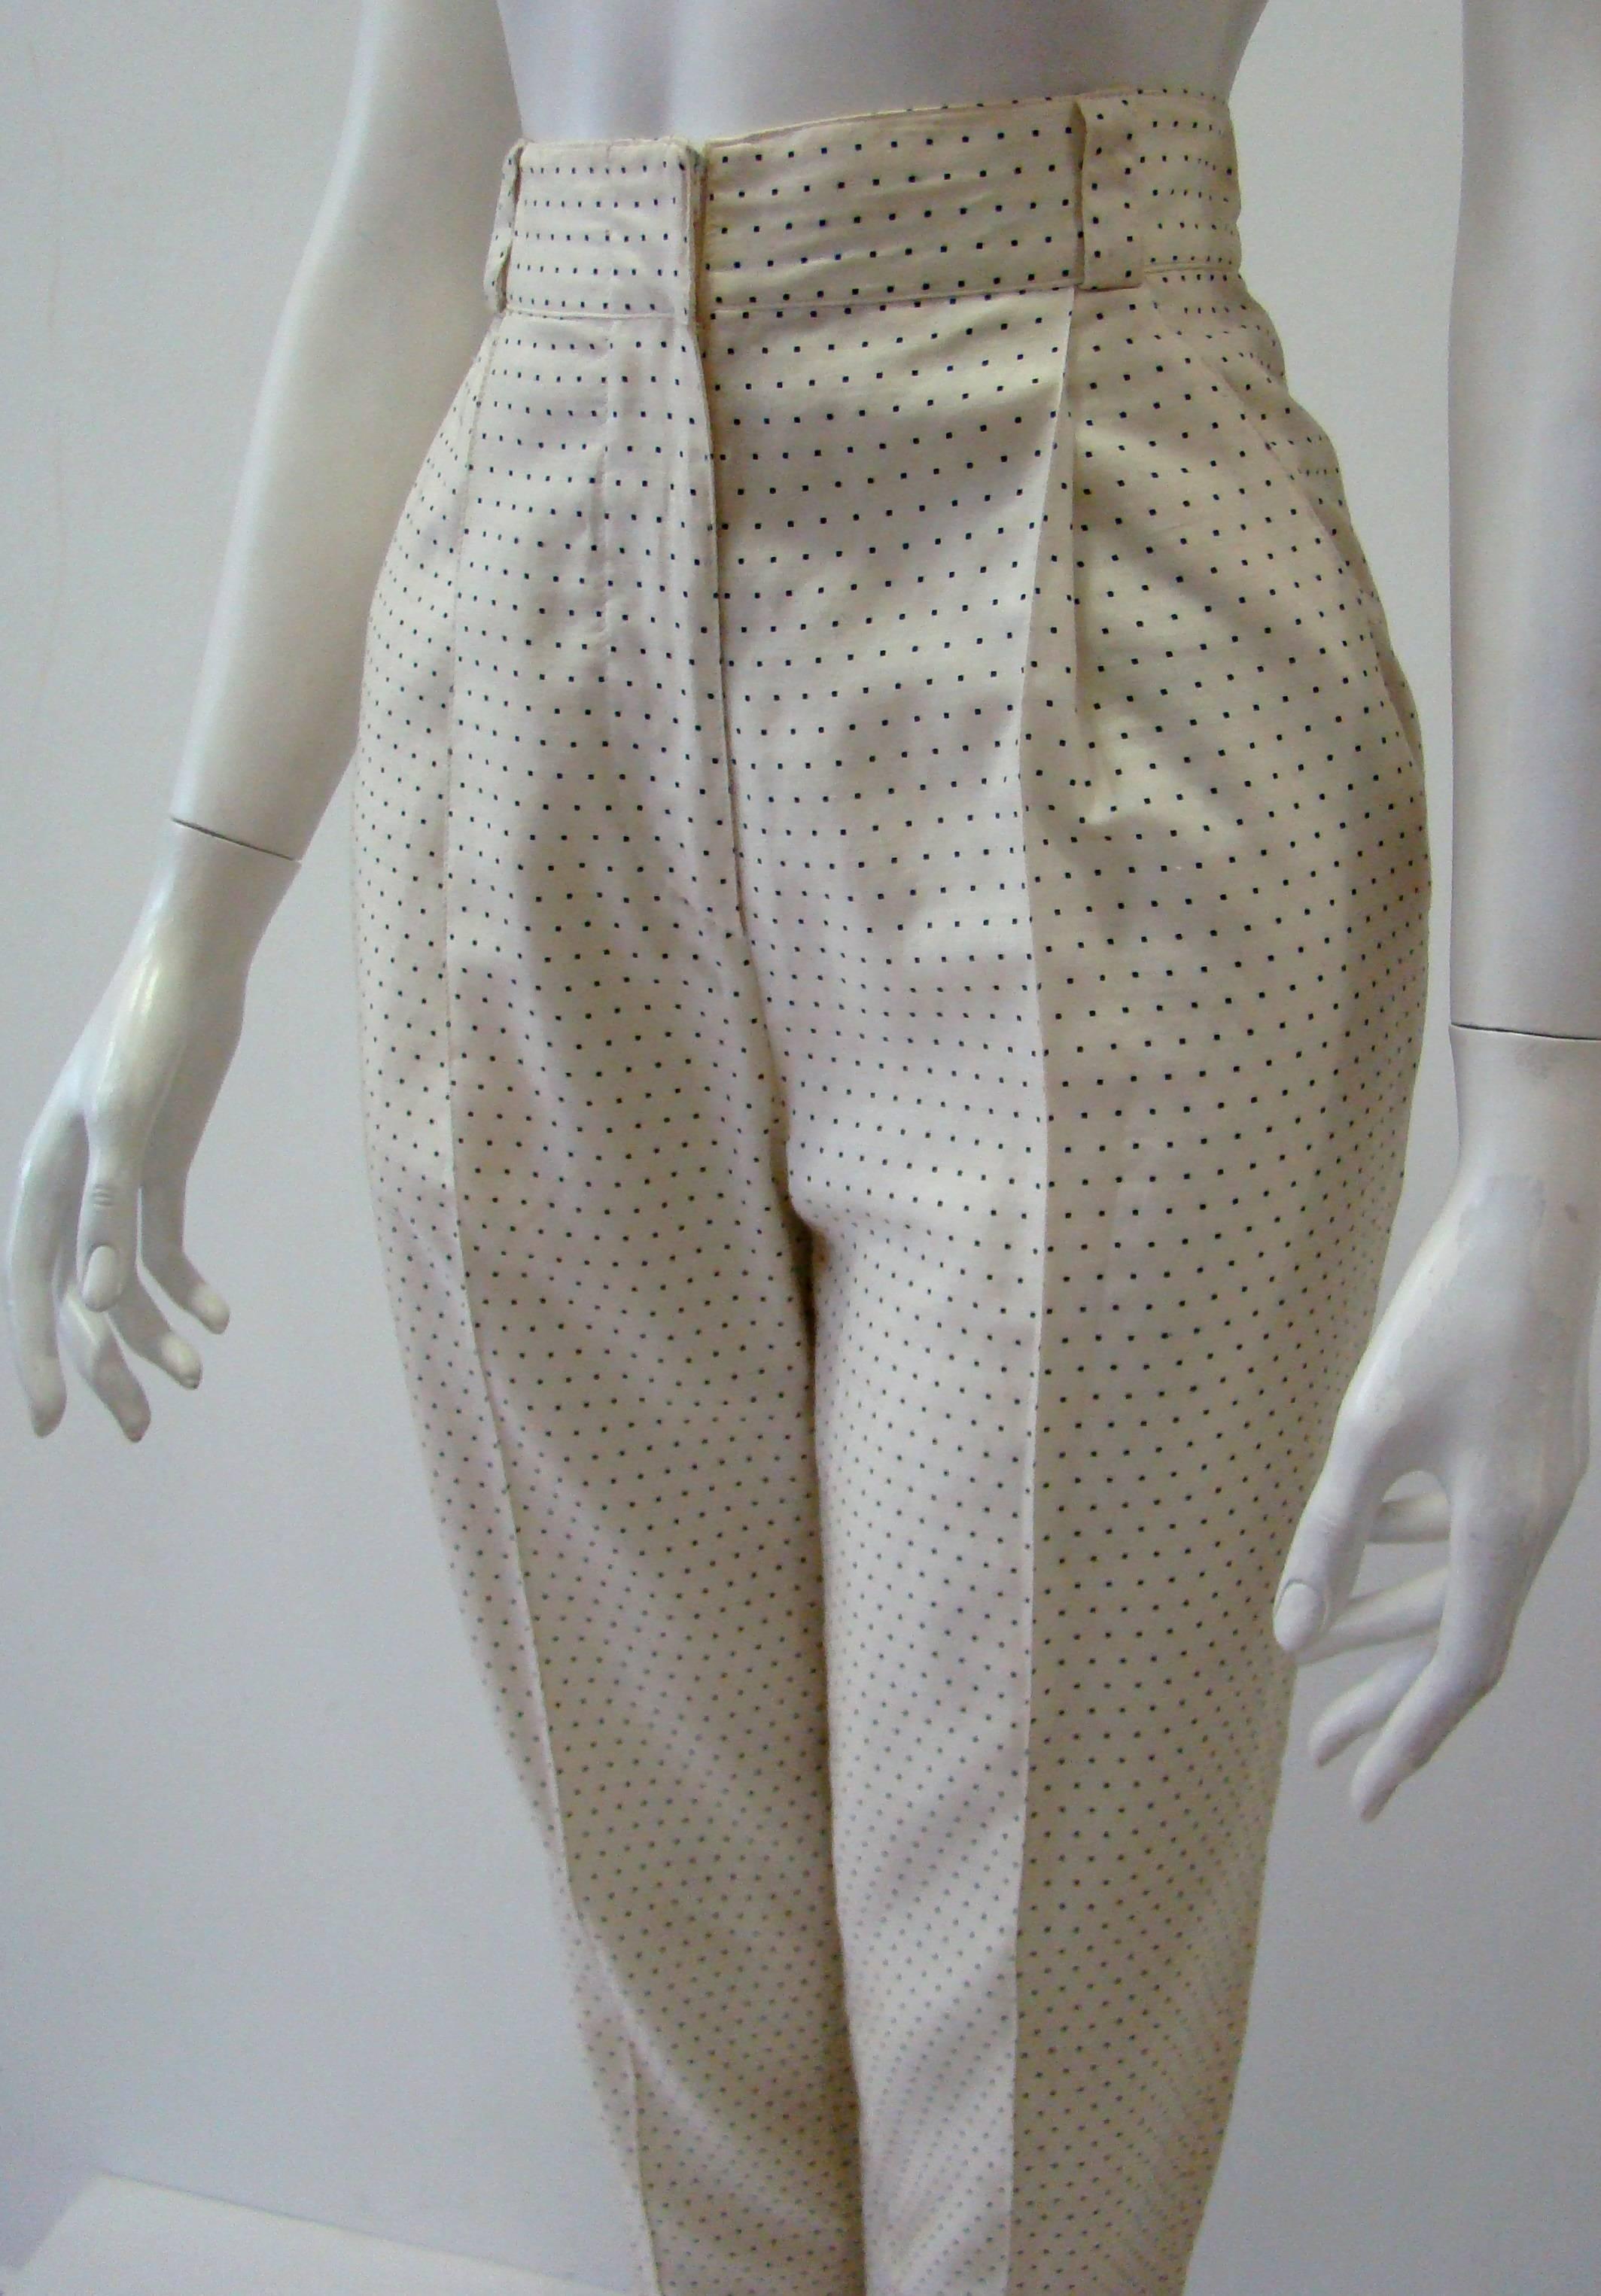 Early Gianni Versace Polka Dot Cotton Pants Spring 1988 For Sale 1